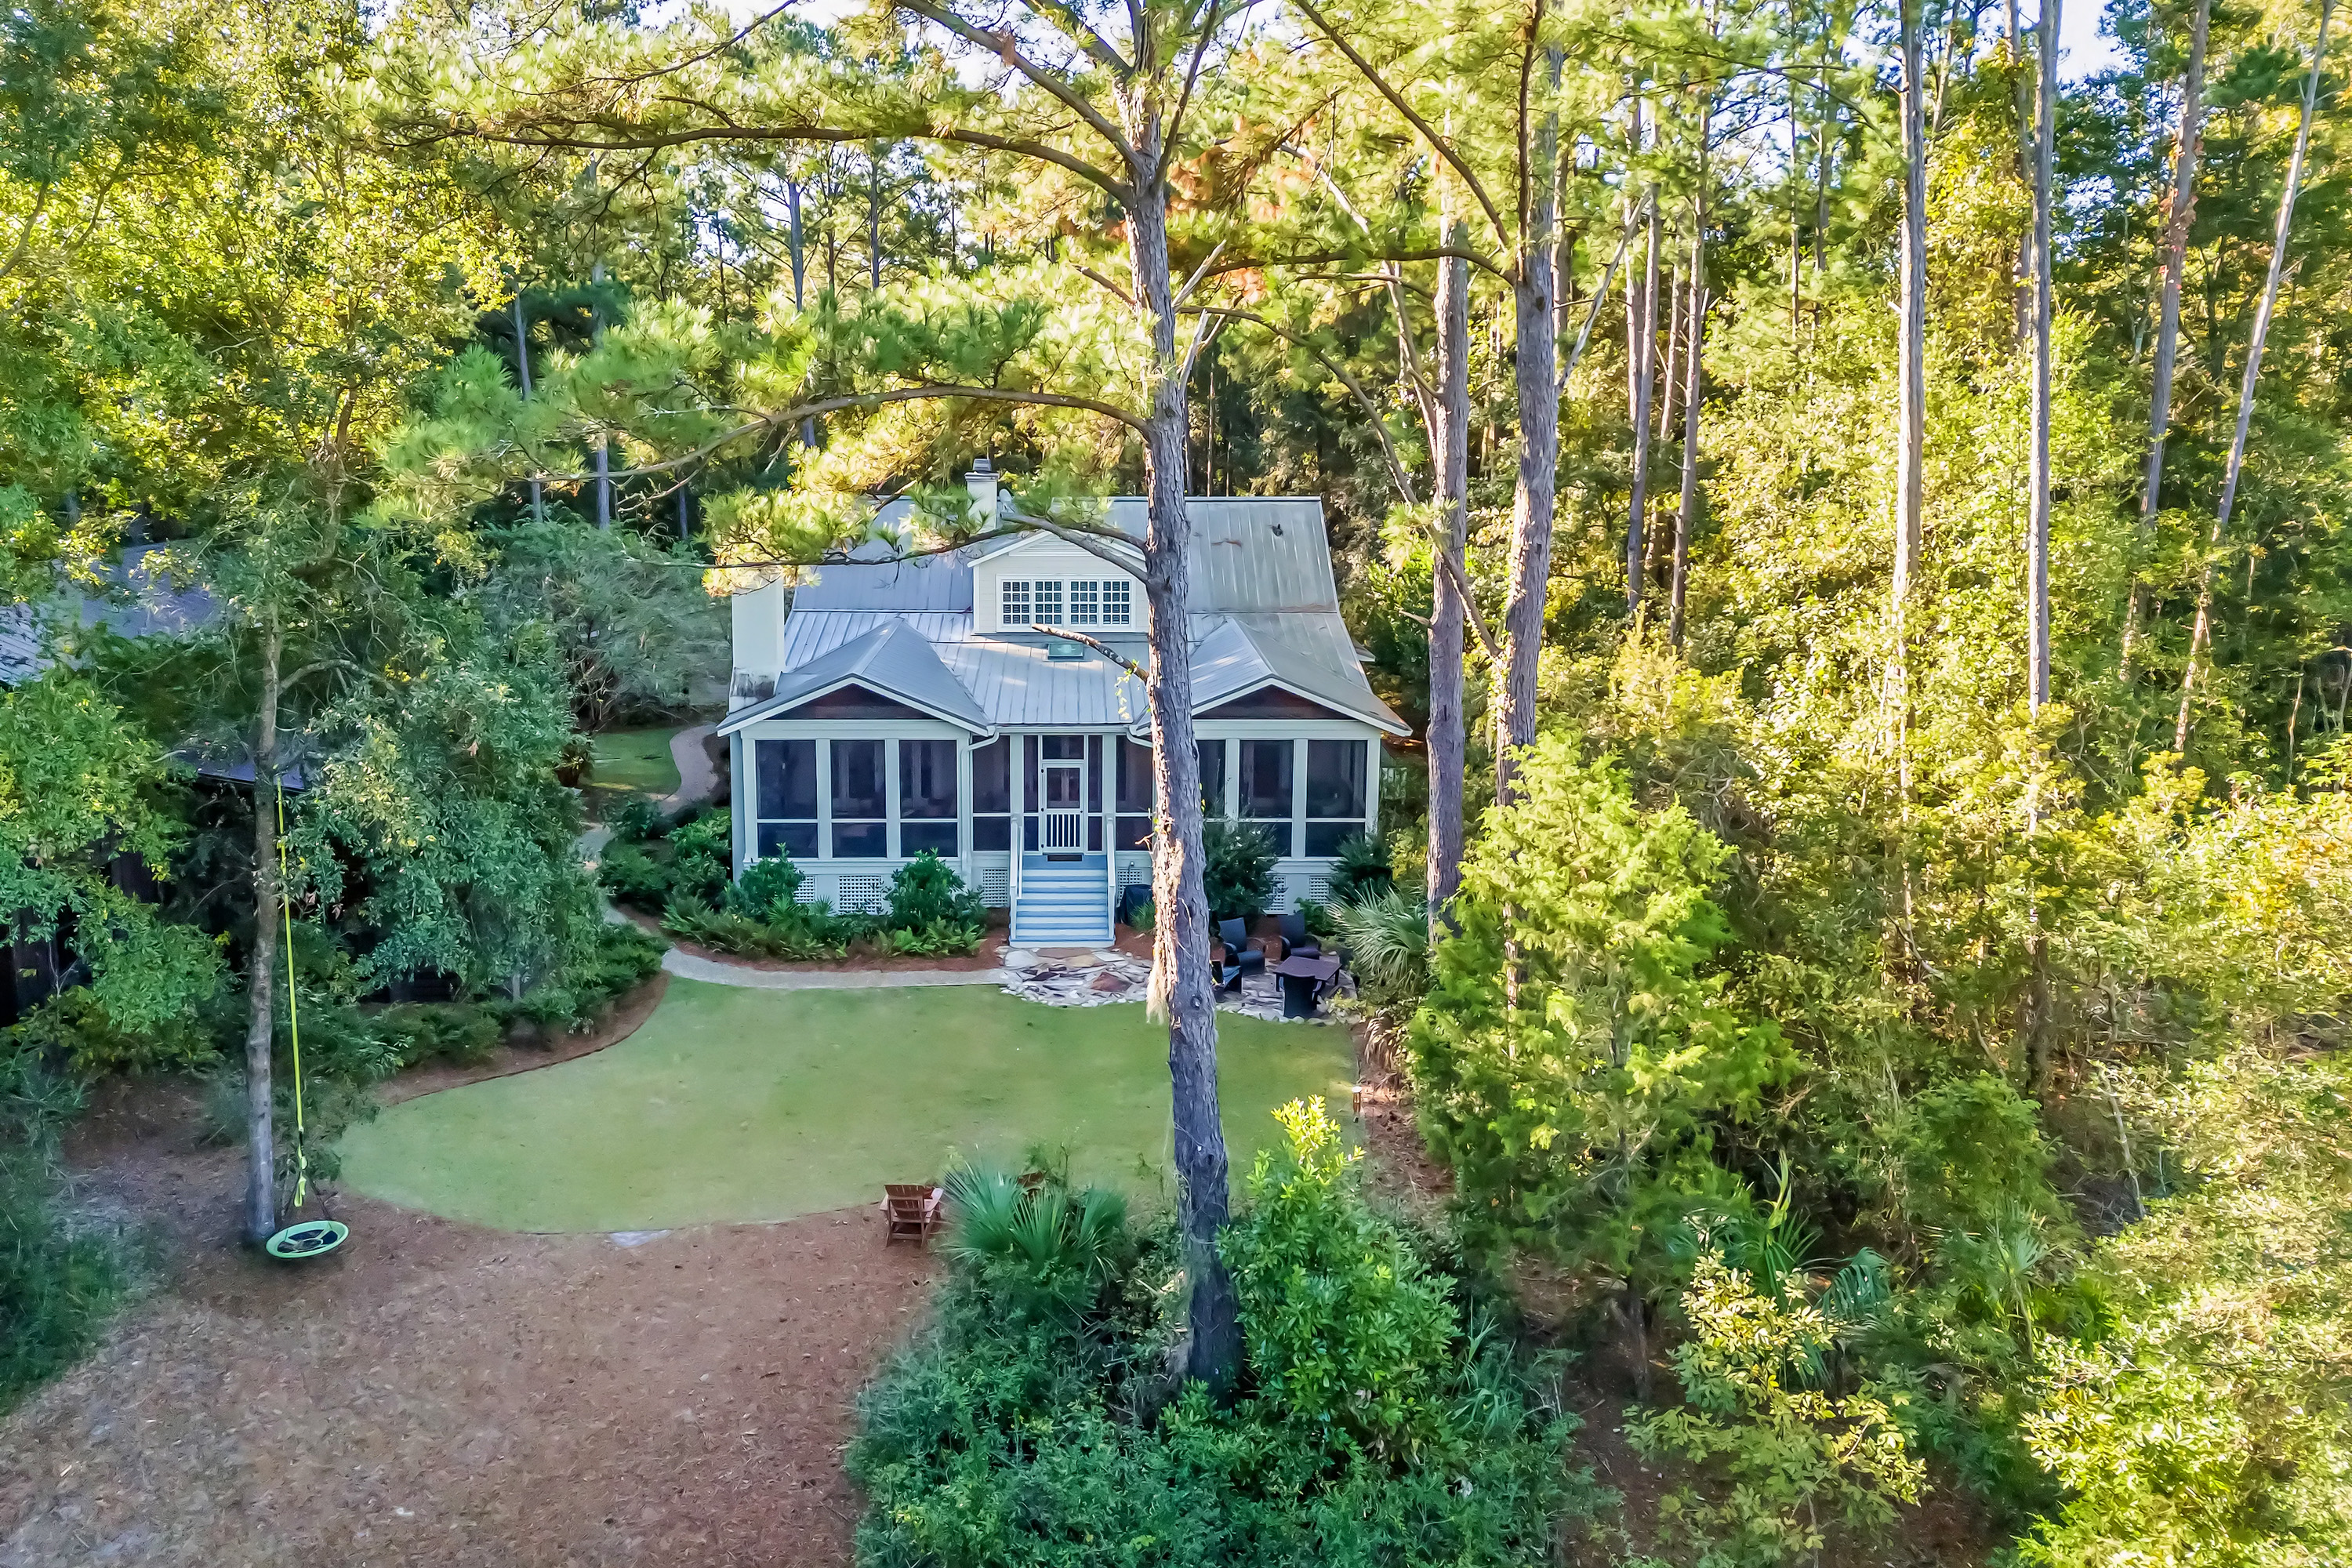 Beaufort SC Real Estate & Waterfront Homes for Sale | Spring Island